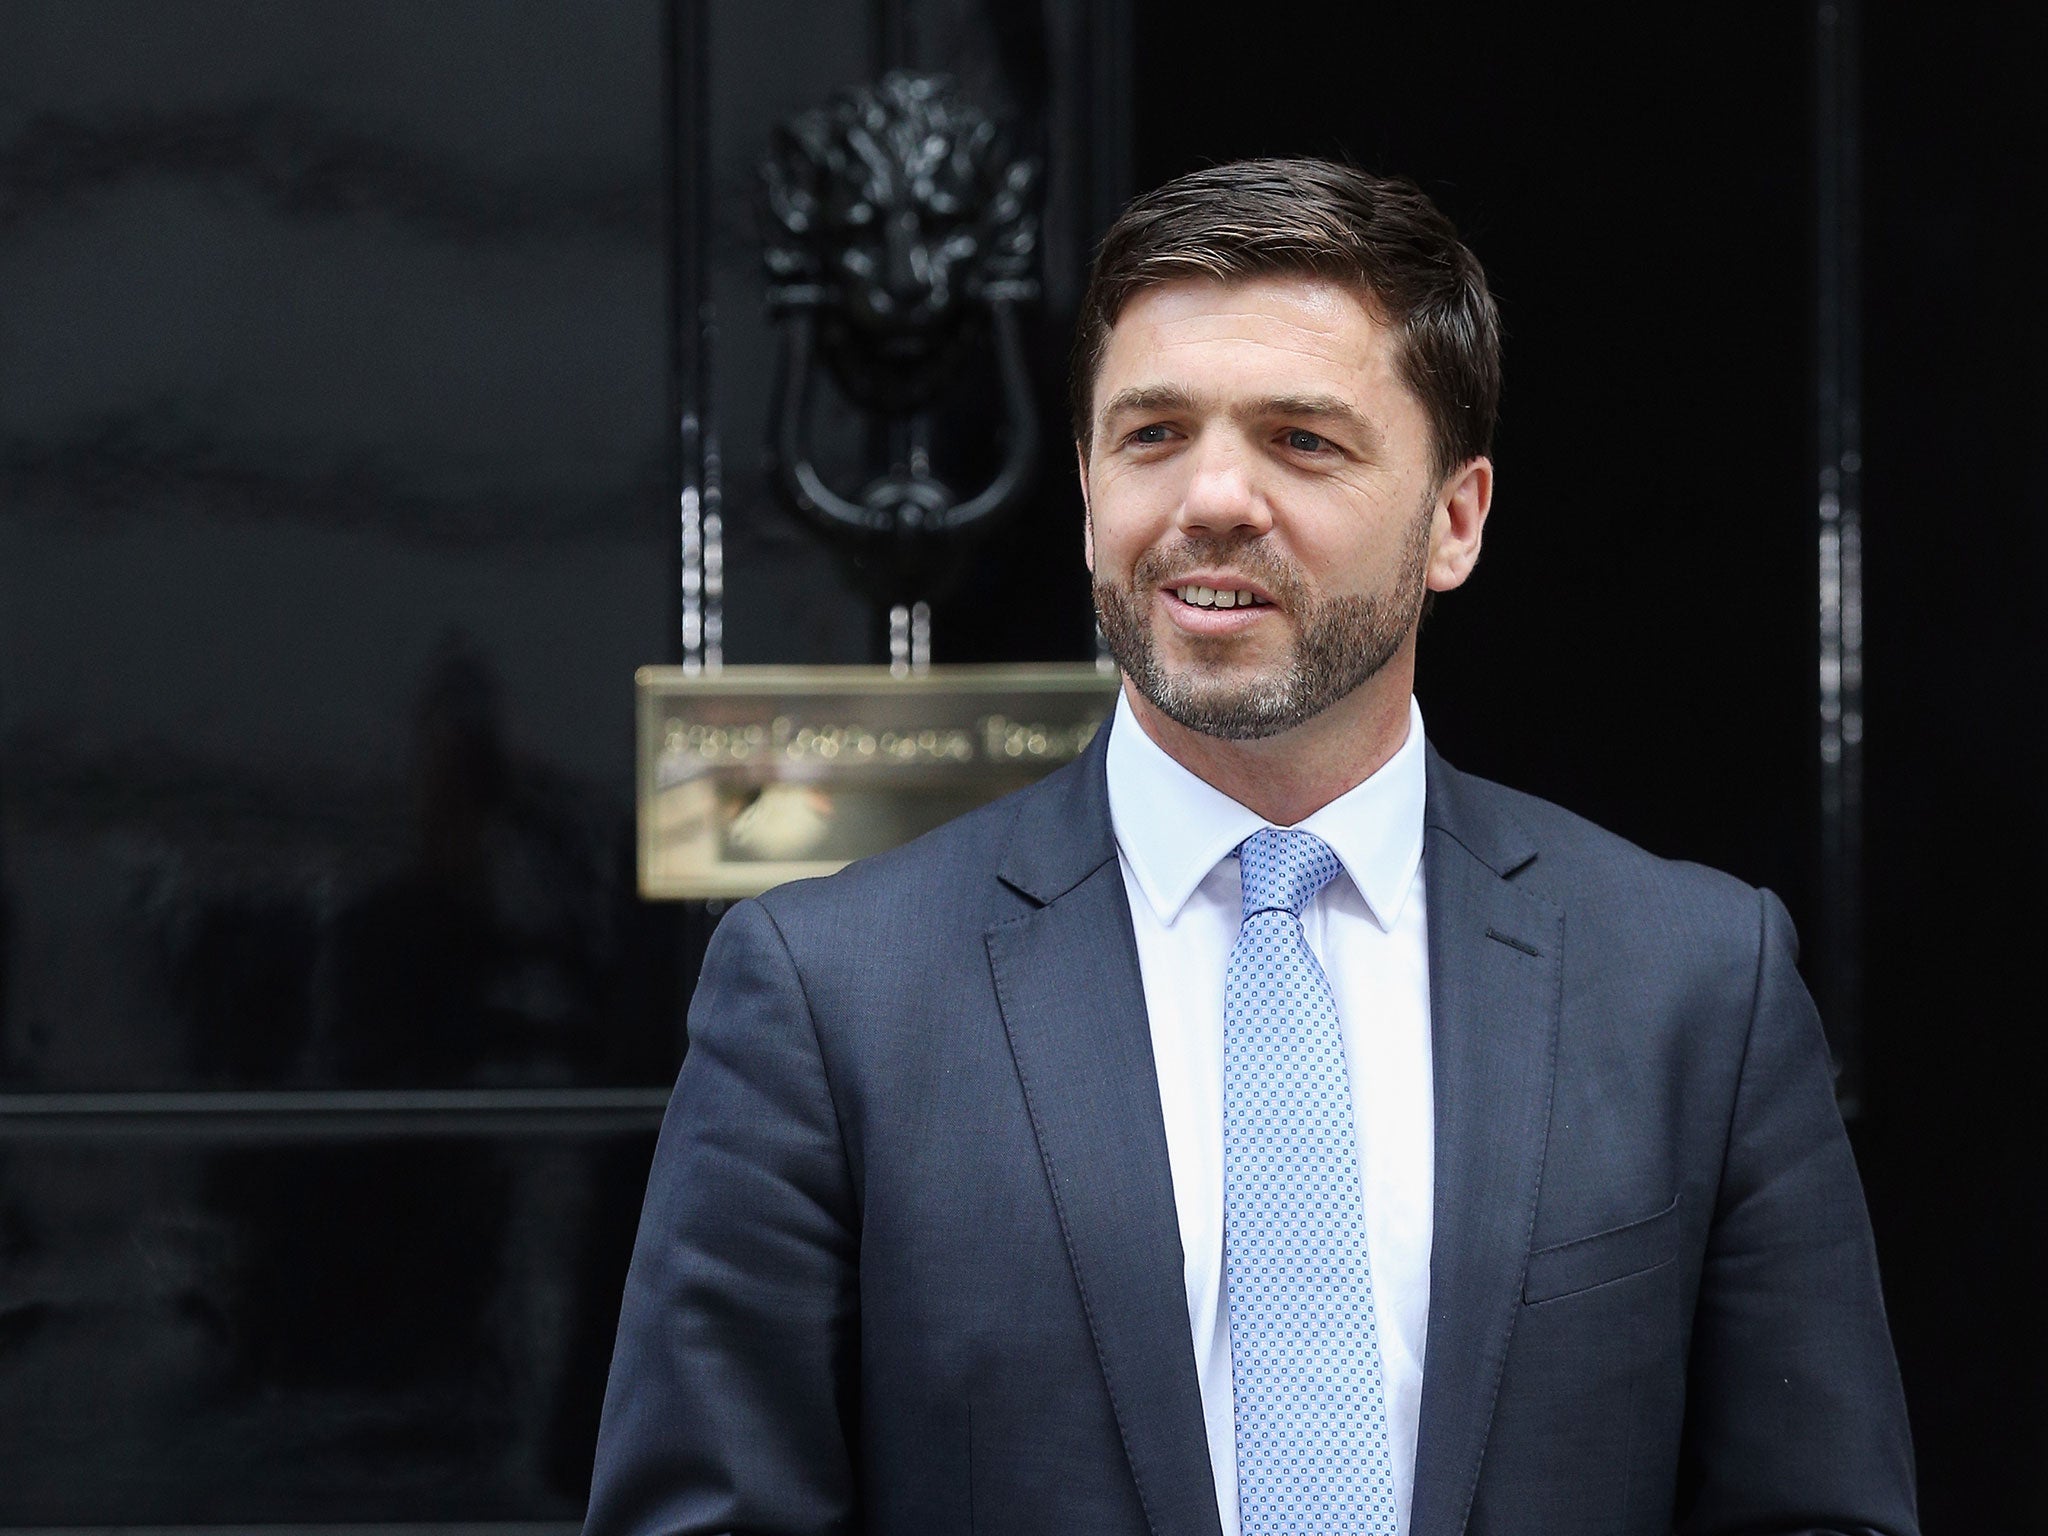 Stephen Crabb has been appointed the new Minister for Work and Pensions